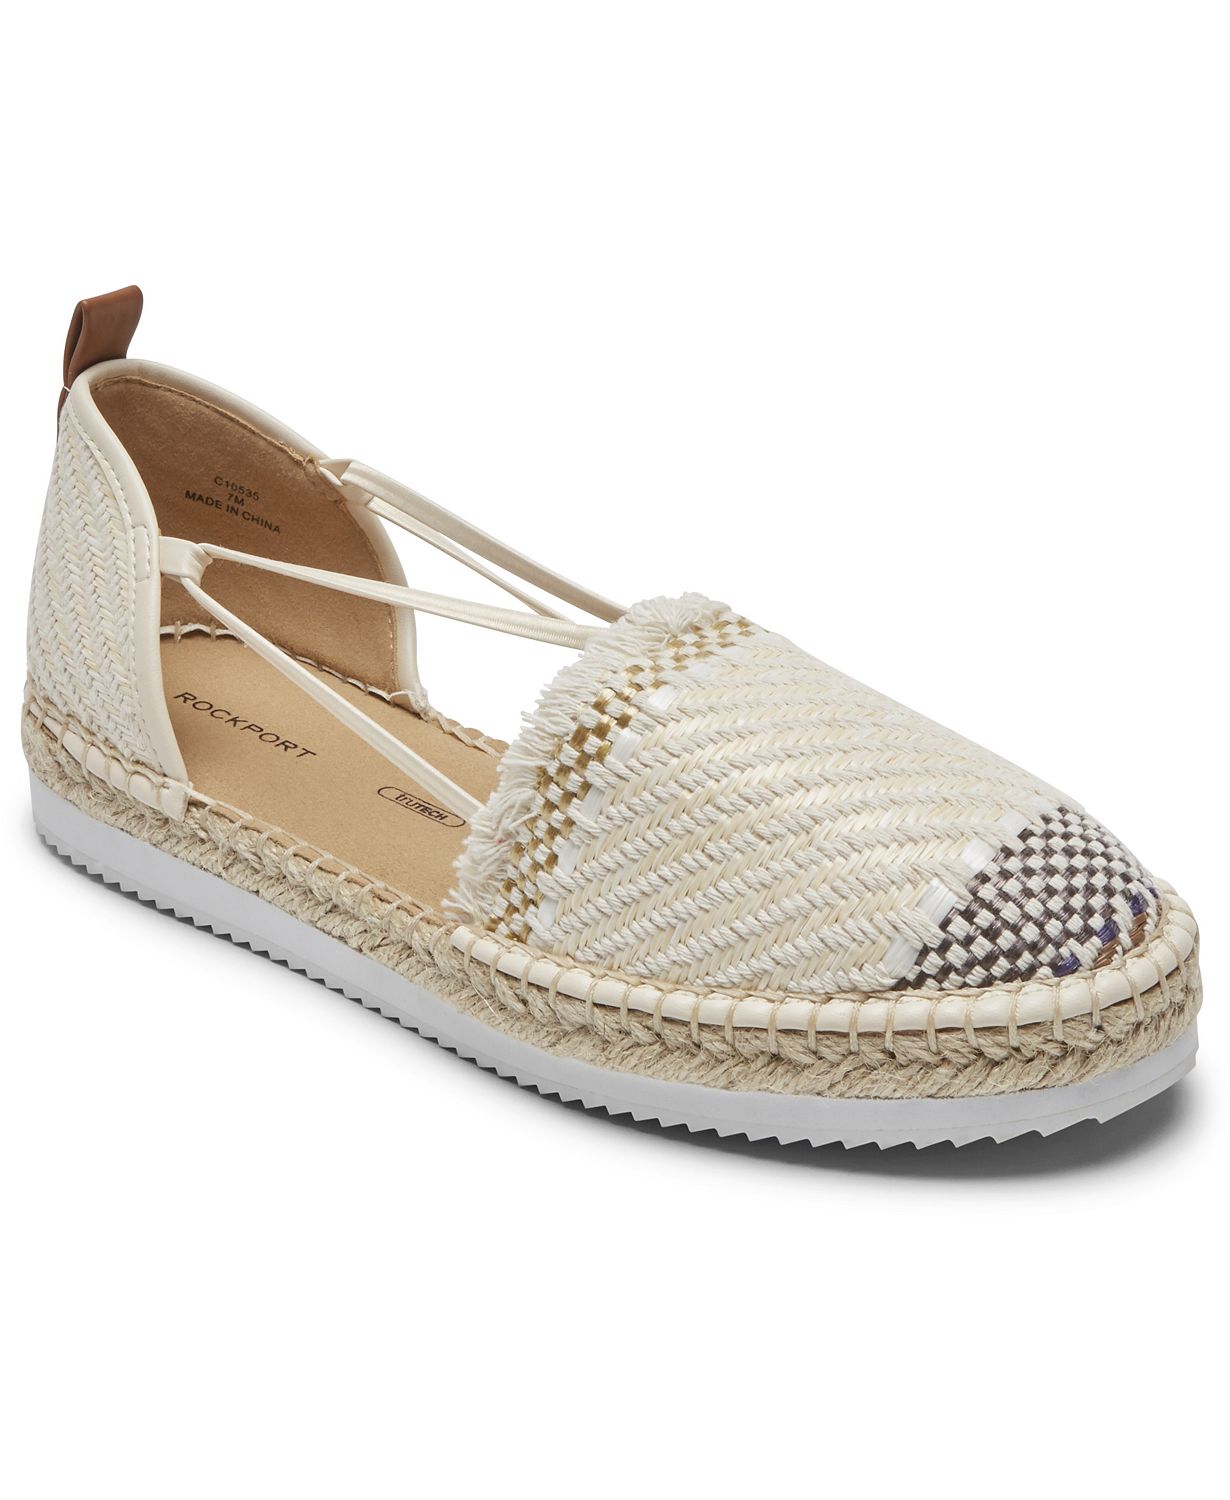 *FLASH SALE!* Macy’s – 50-75% Off Womens’ Shoes! FREE Shipping with $25 ...